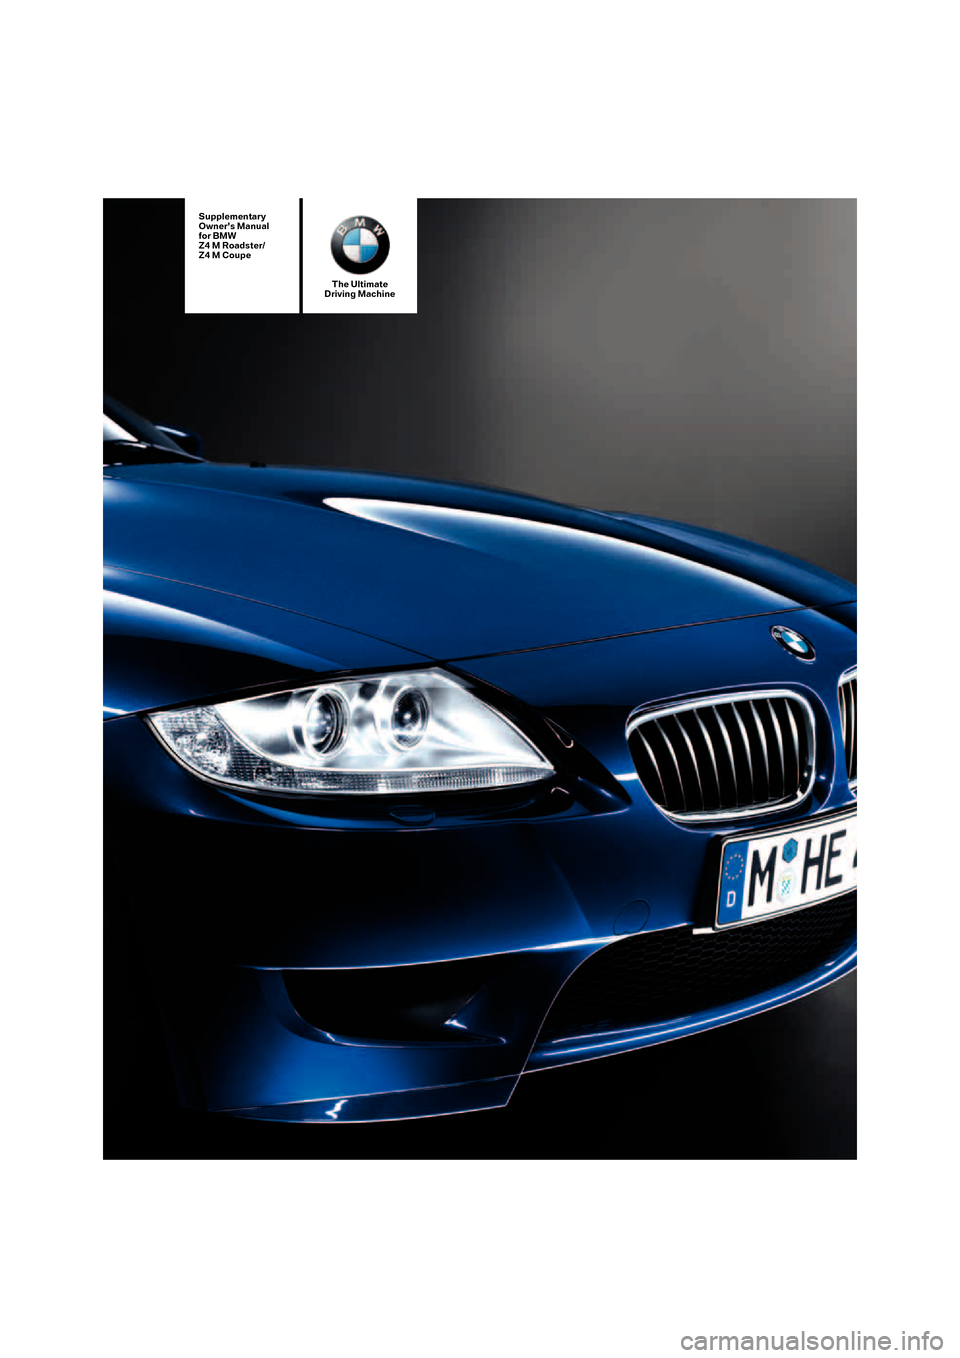 BMW Z4M ROADSTER 2007 E85 Owners Manual The Ultimate
Driving Machine
Supplementary
Owners Manual
for BMW
Z4 M Roadster/
Z4 M Coupe
ba5.book  Seite 1  Mittwoch, 28. Februar 2007  1:09 13 